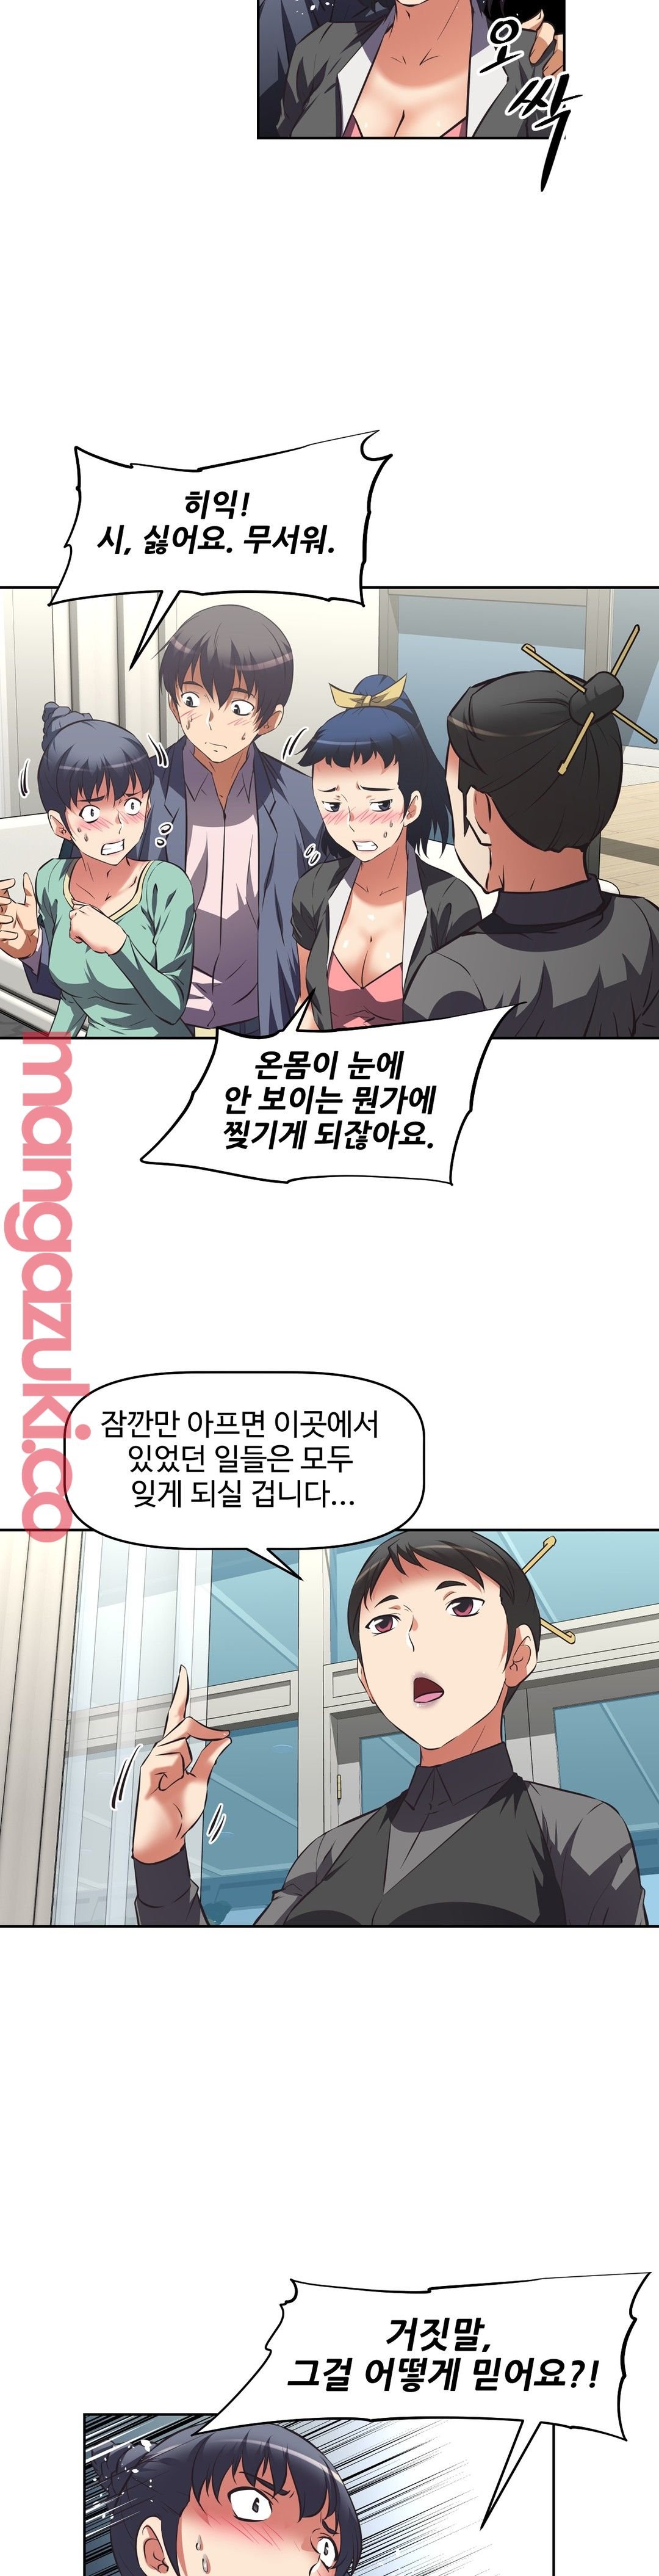 The Girls’ Nest Raw - Chapter 46 Page 3